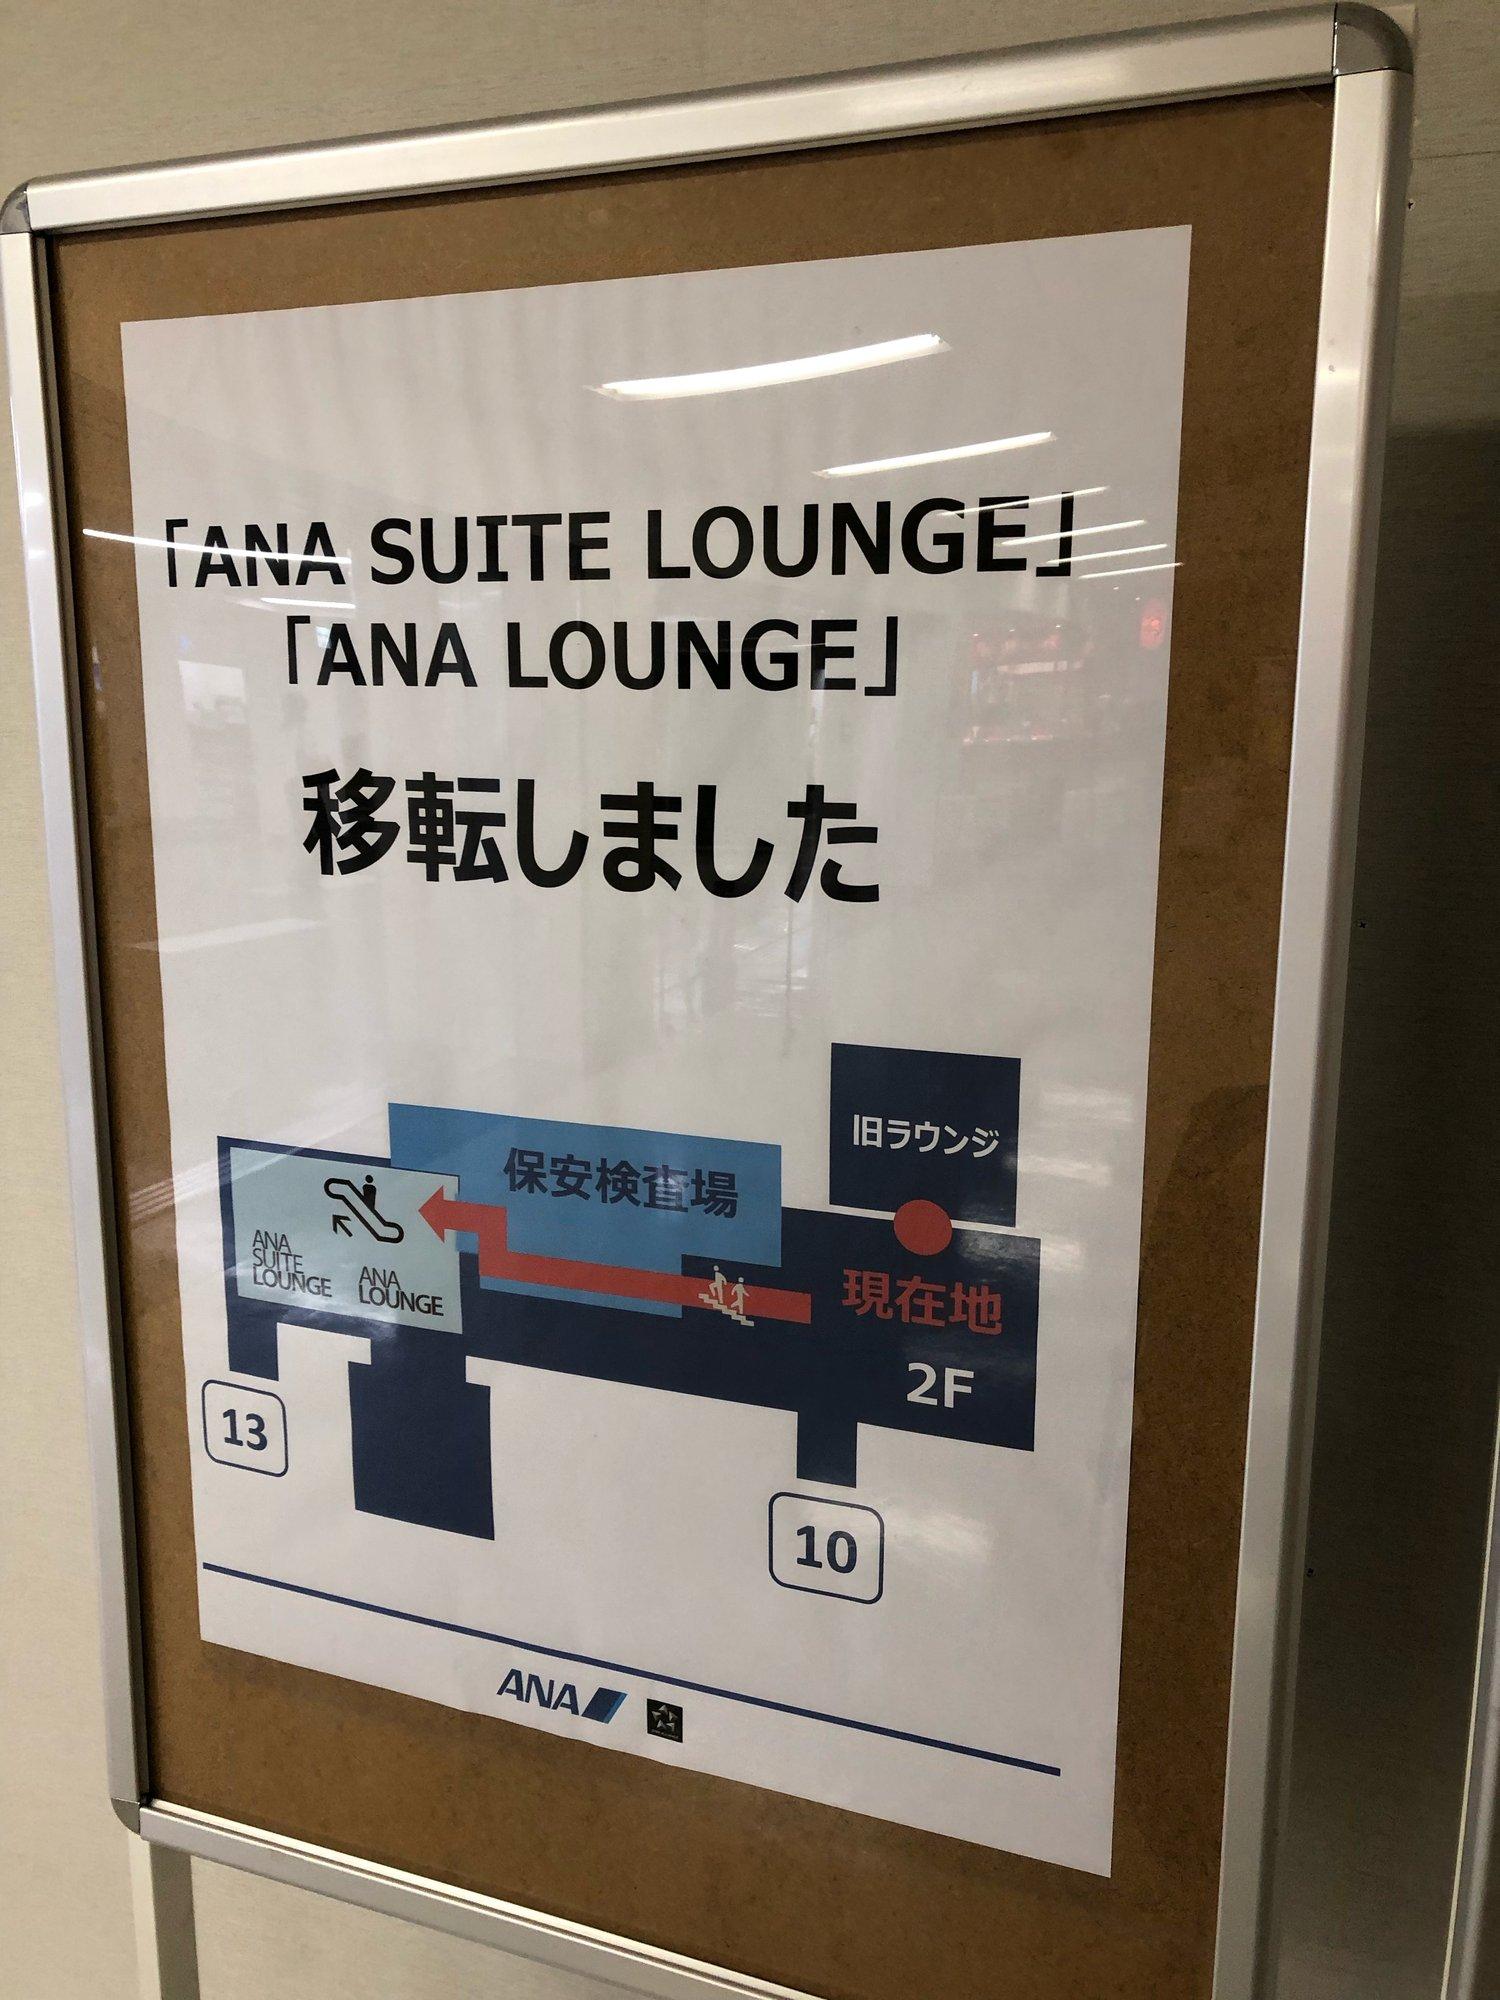 All Nippon Airways ANA Lounge image 2 of 4